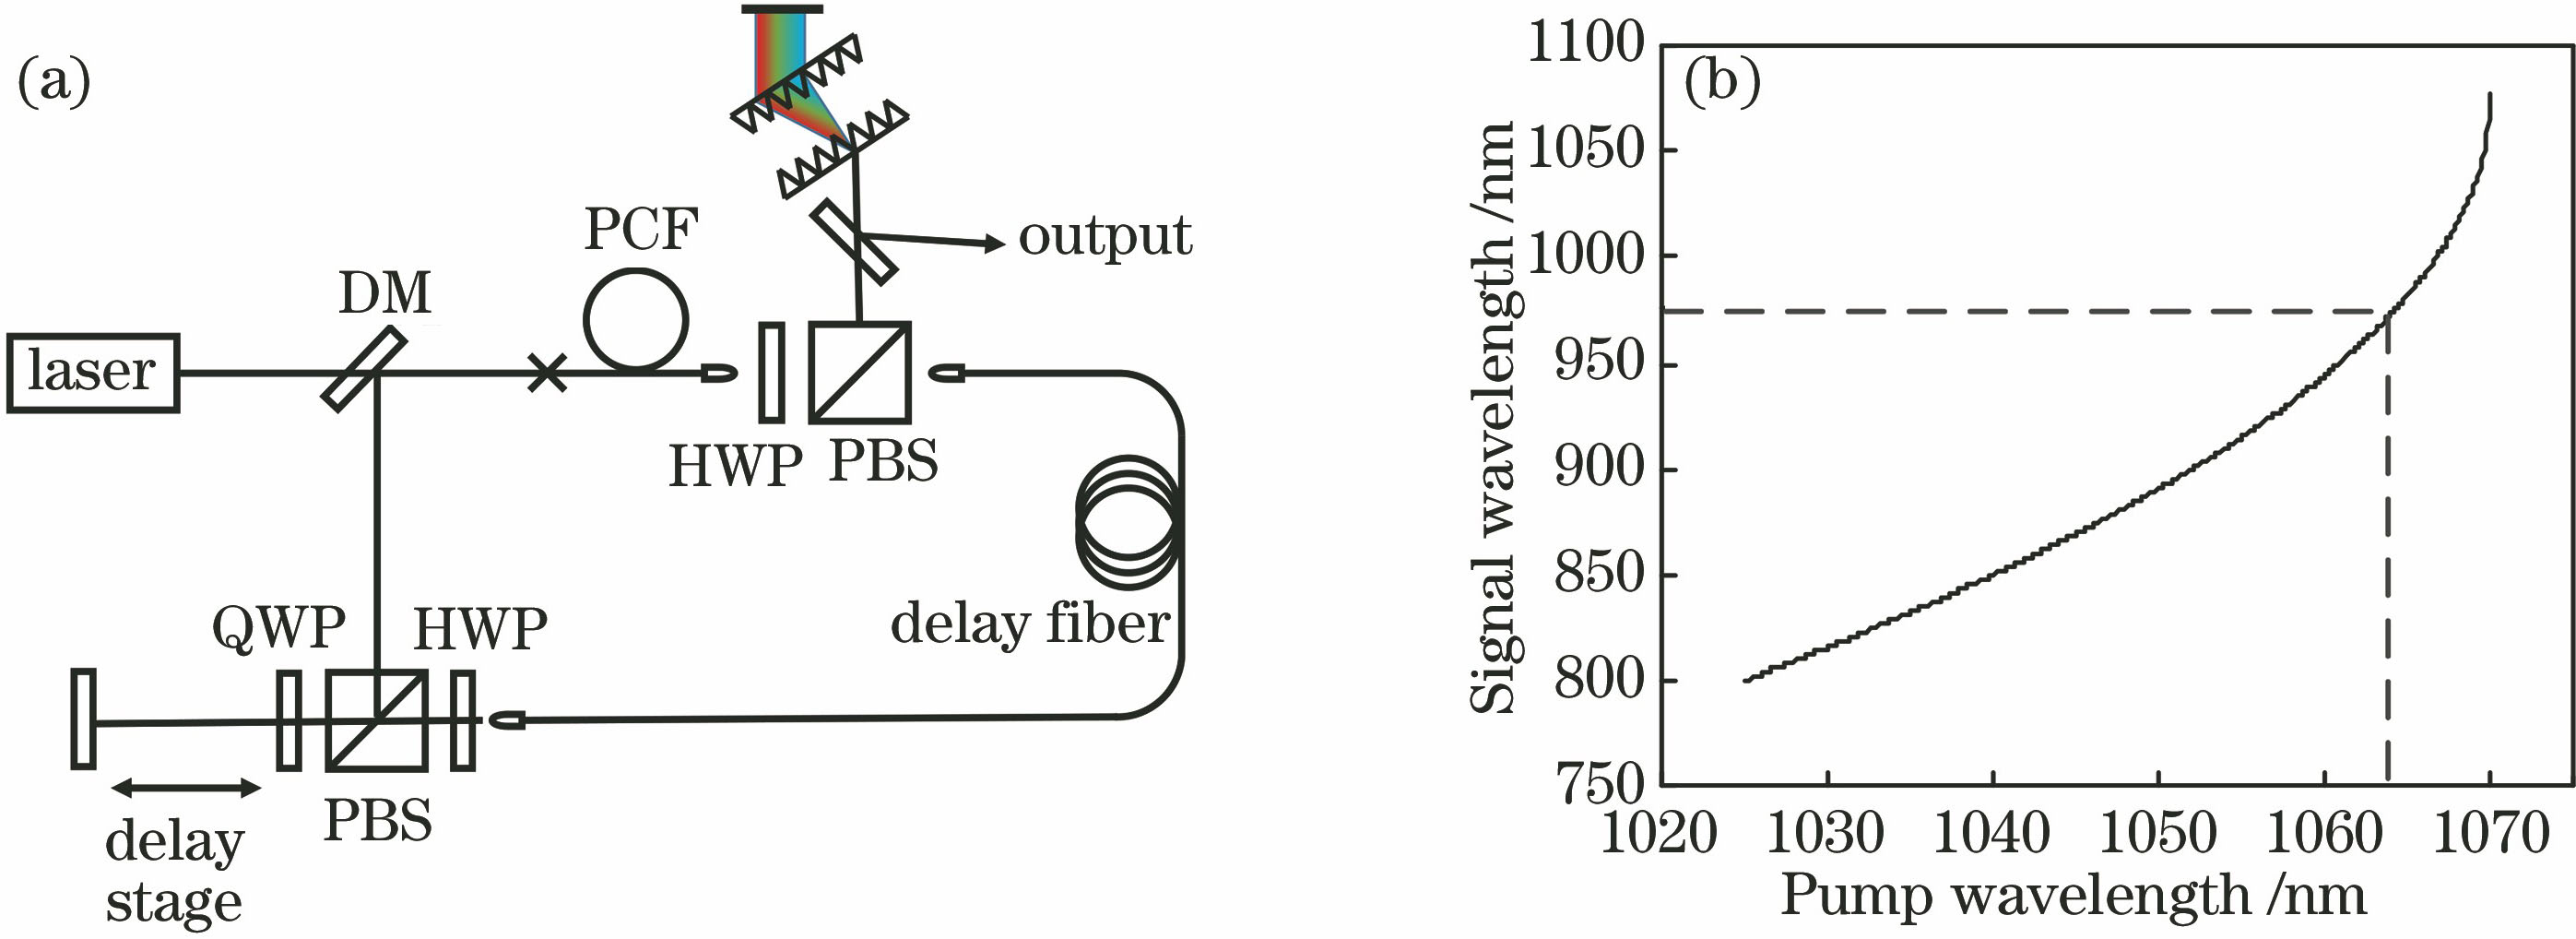 Experimental setup and phase matching curve. (a) Experimental setup of FOPO; (b) calculated signal wavelength for different pump wavelengths